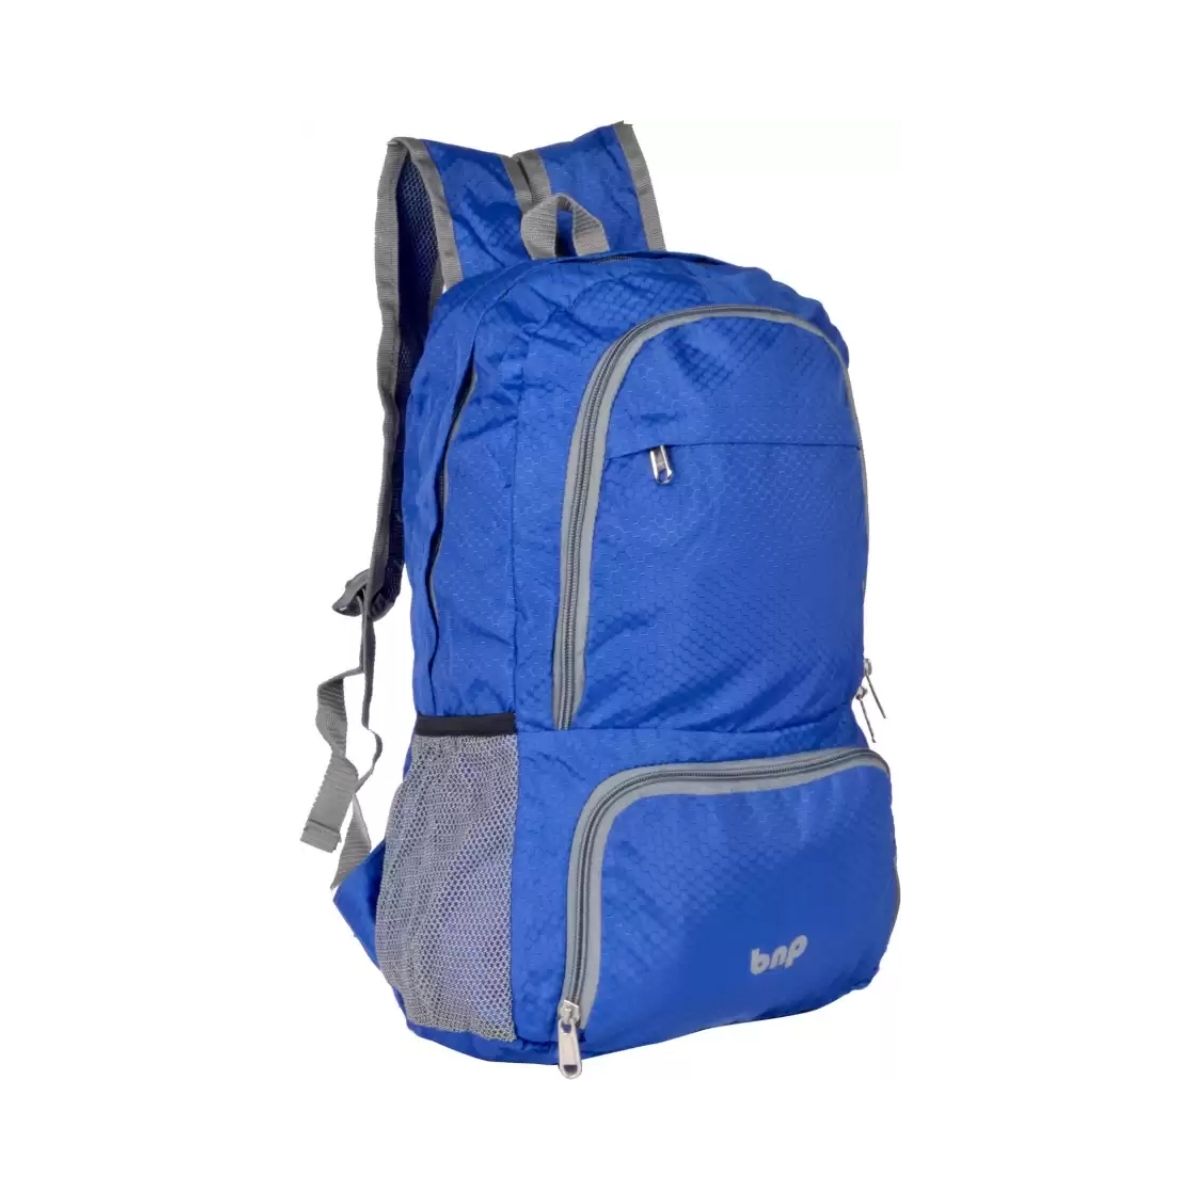 AdventIQ: Foldable Backpack (15L) - Outdoor Travel Gear 2